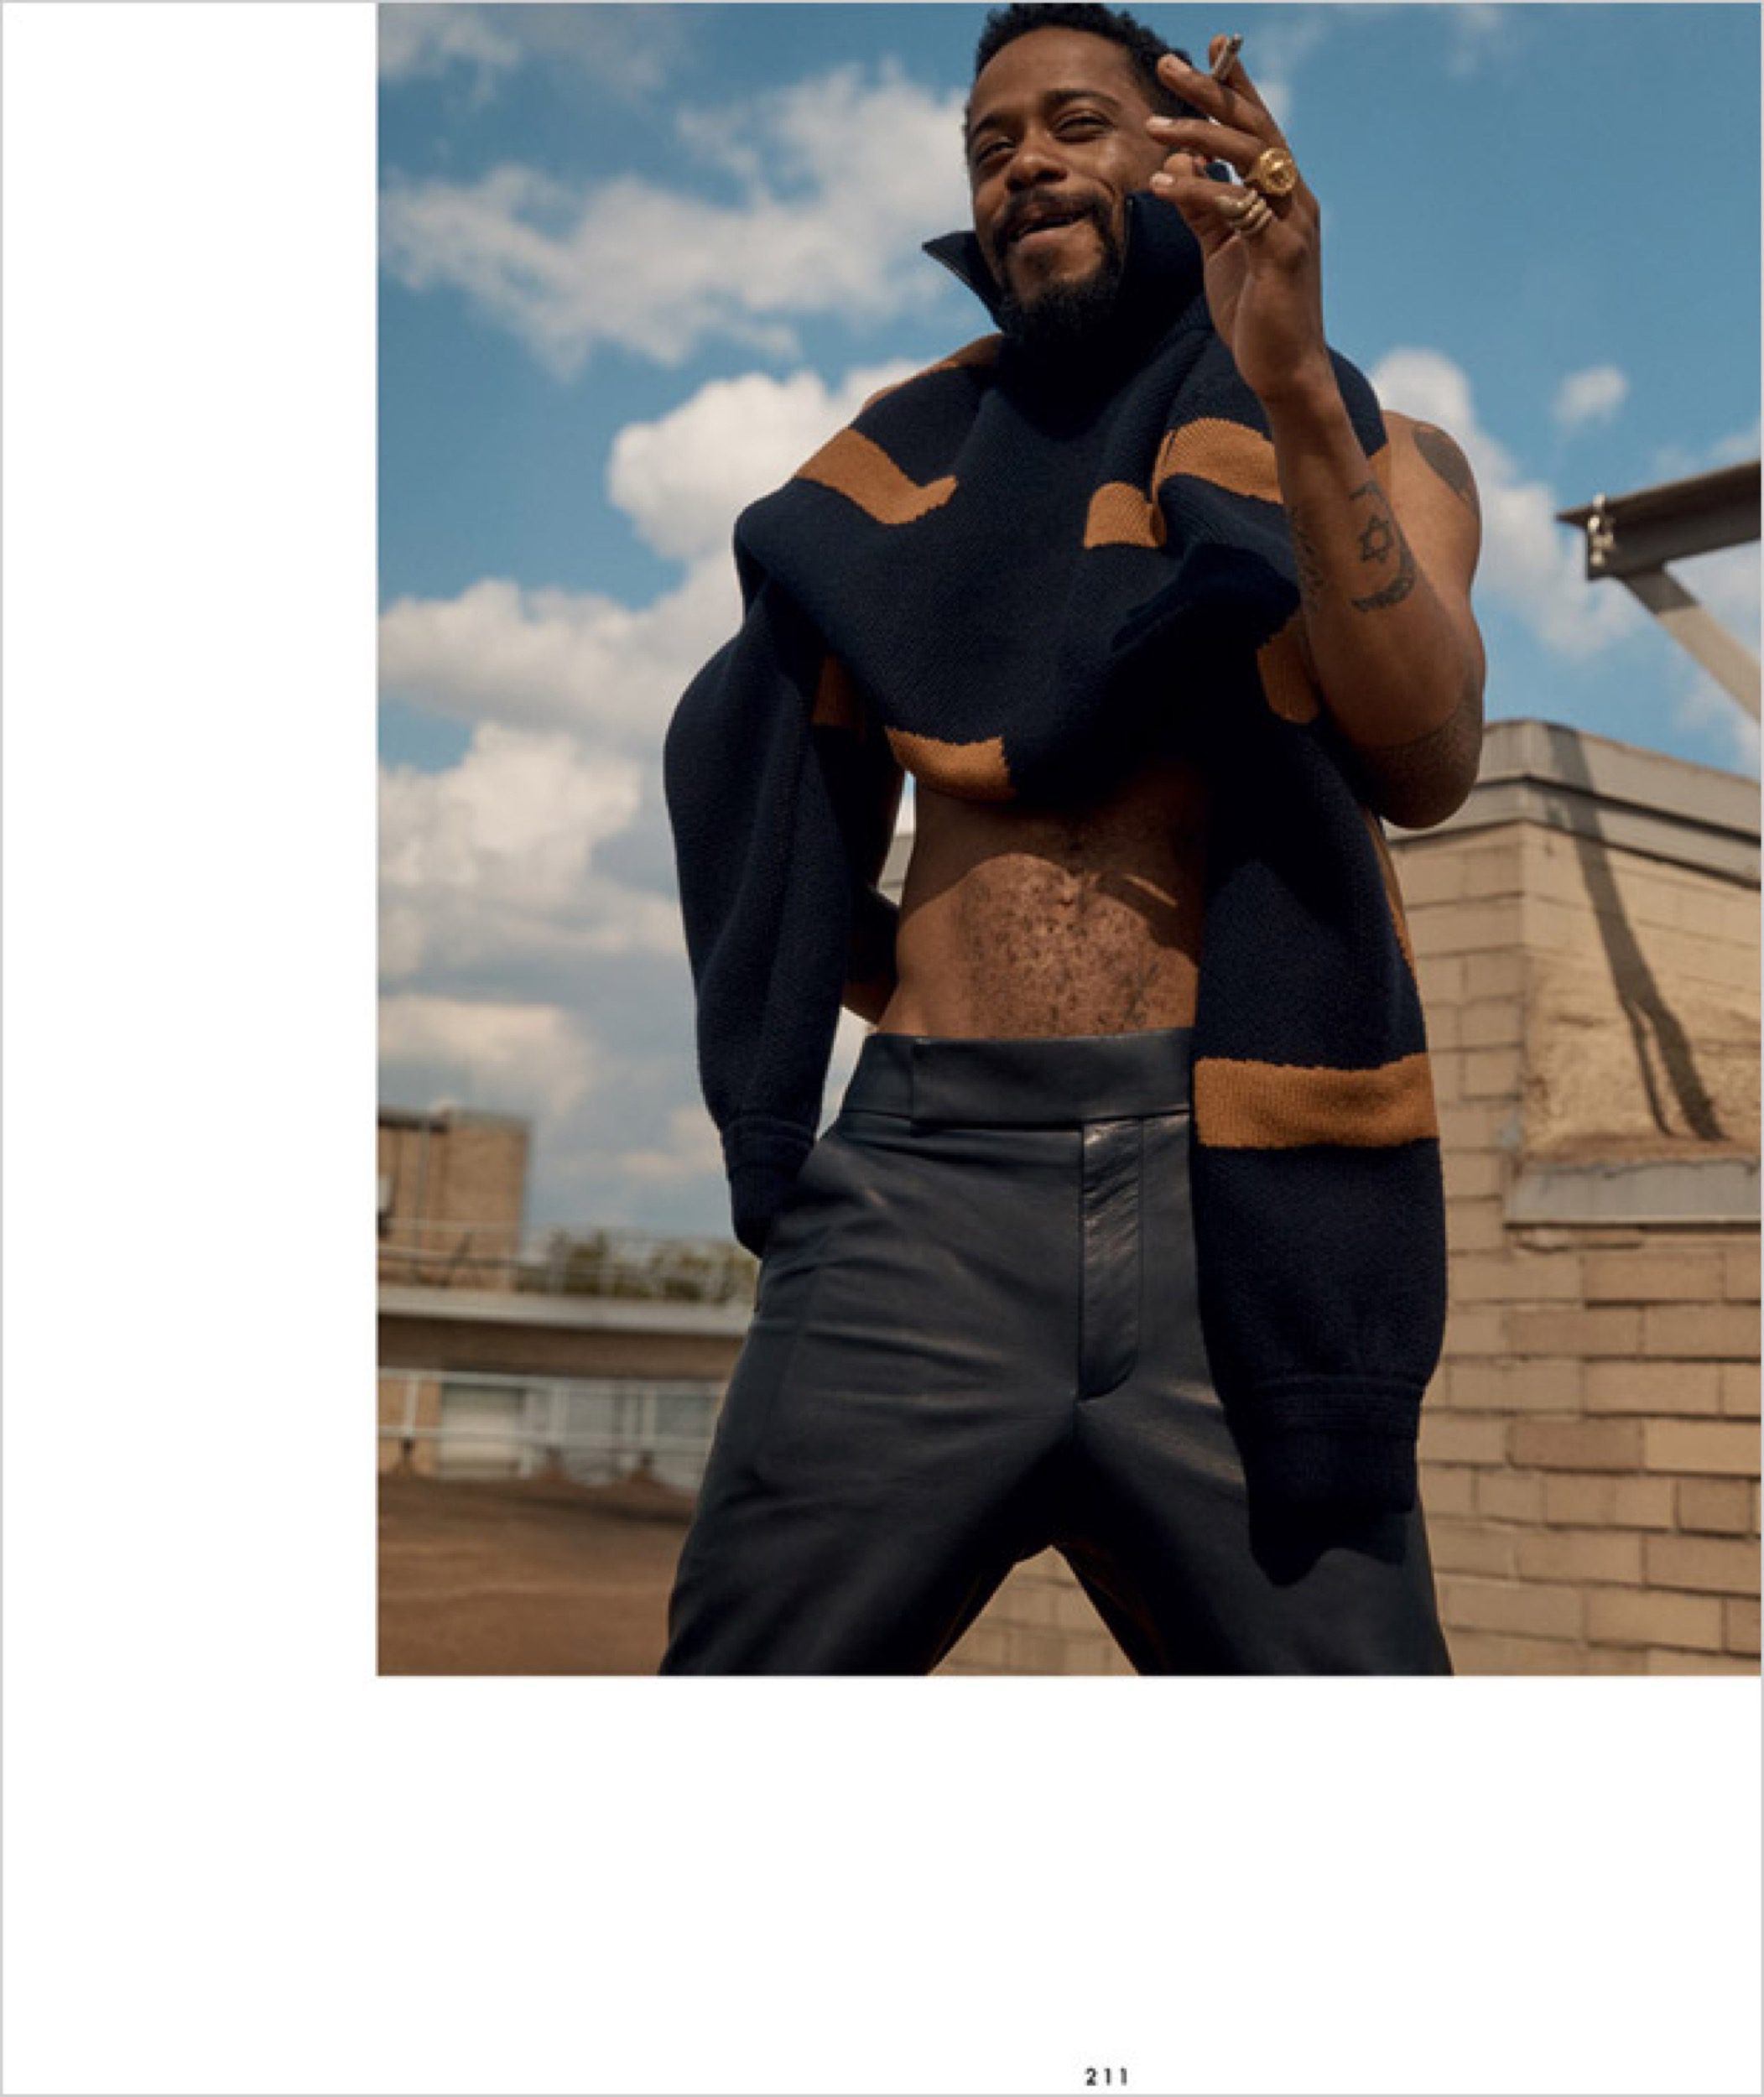 kathrin-hohberg-essential-homme-lakeith-stanfield-david-roemer-15